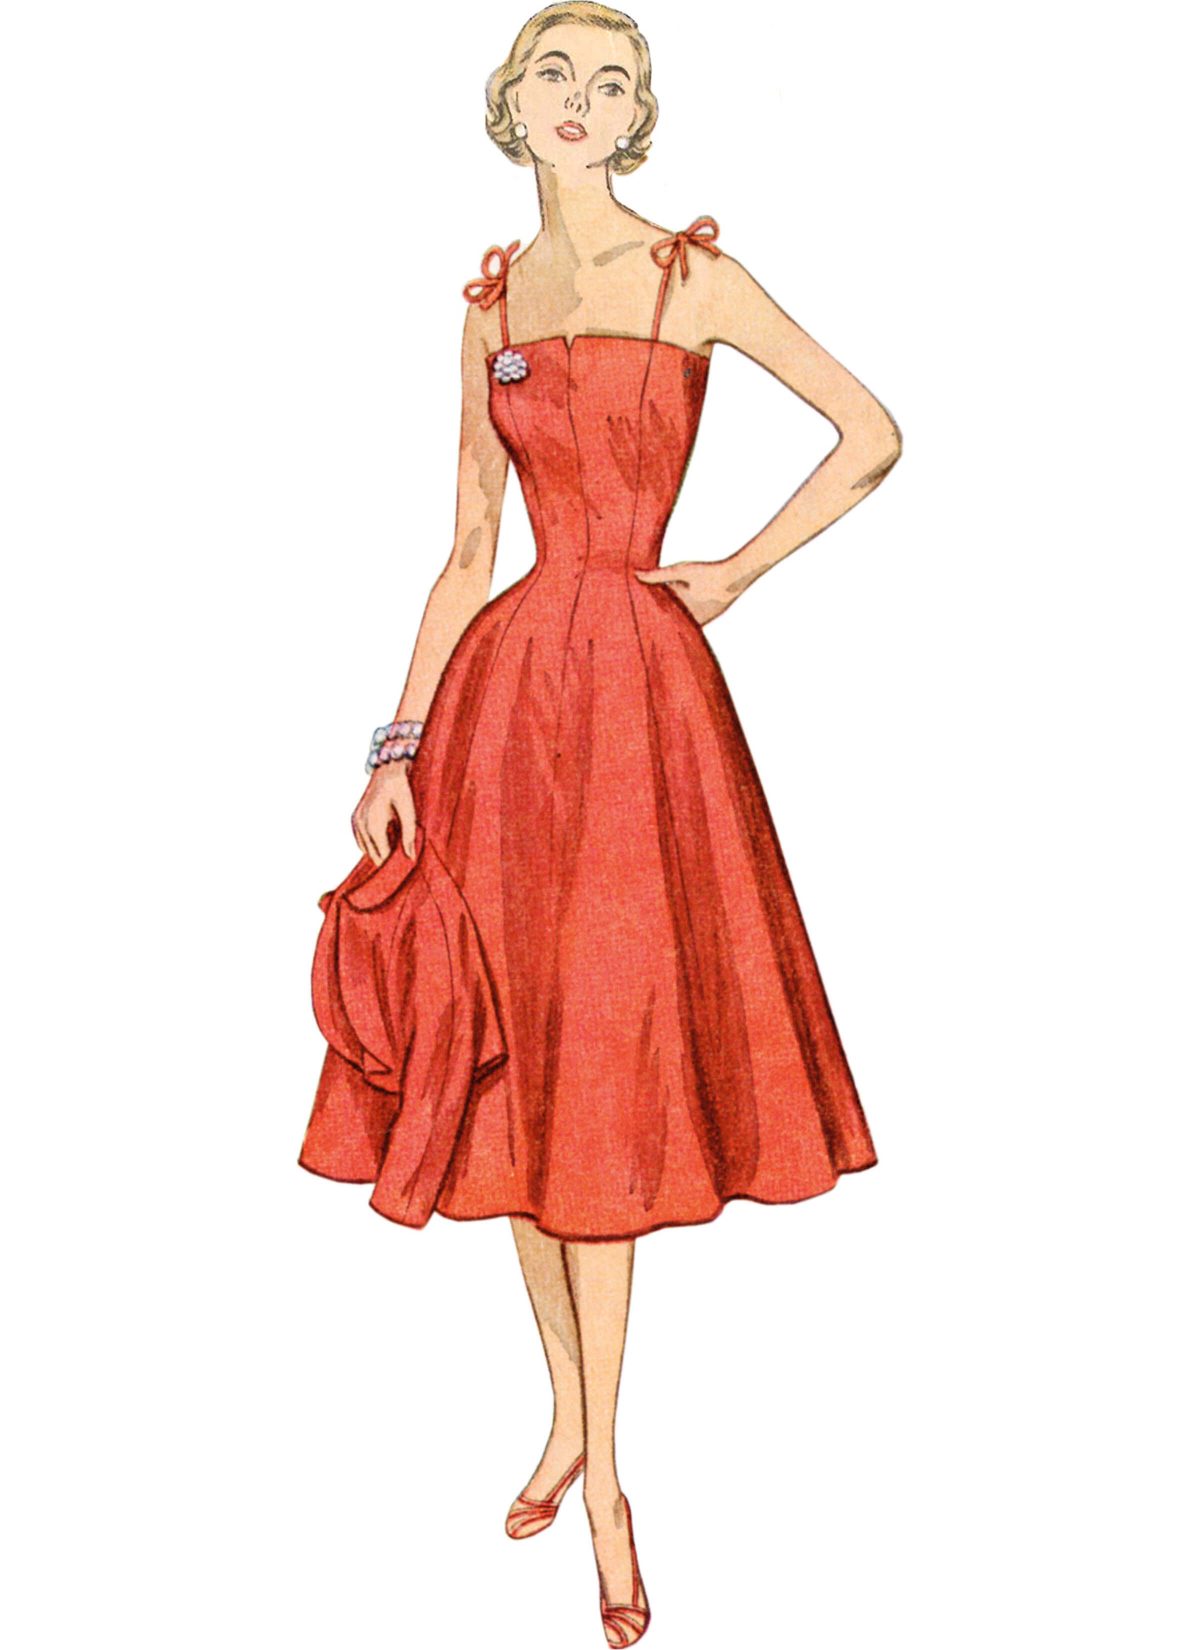 Simplicity Sewing Pattern S9738 Misses' Dresses and Jacket